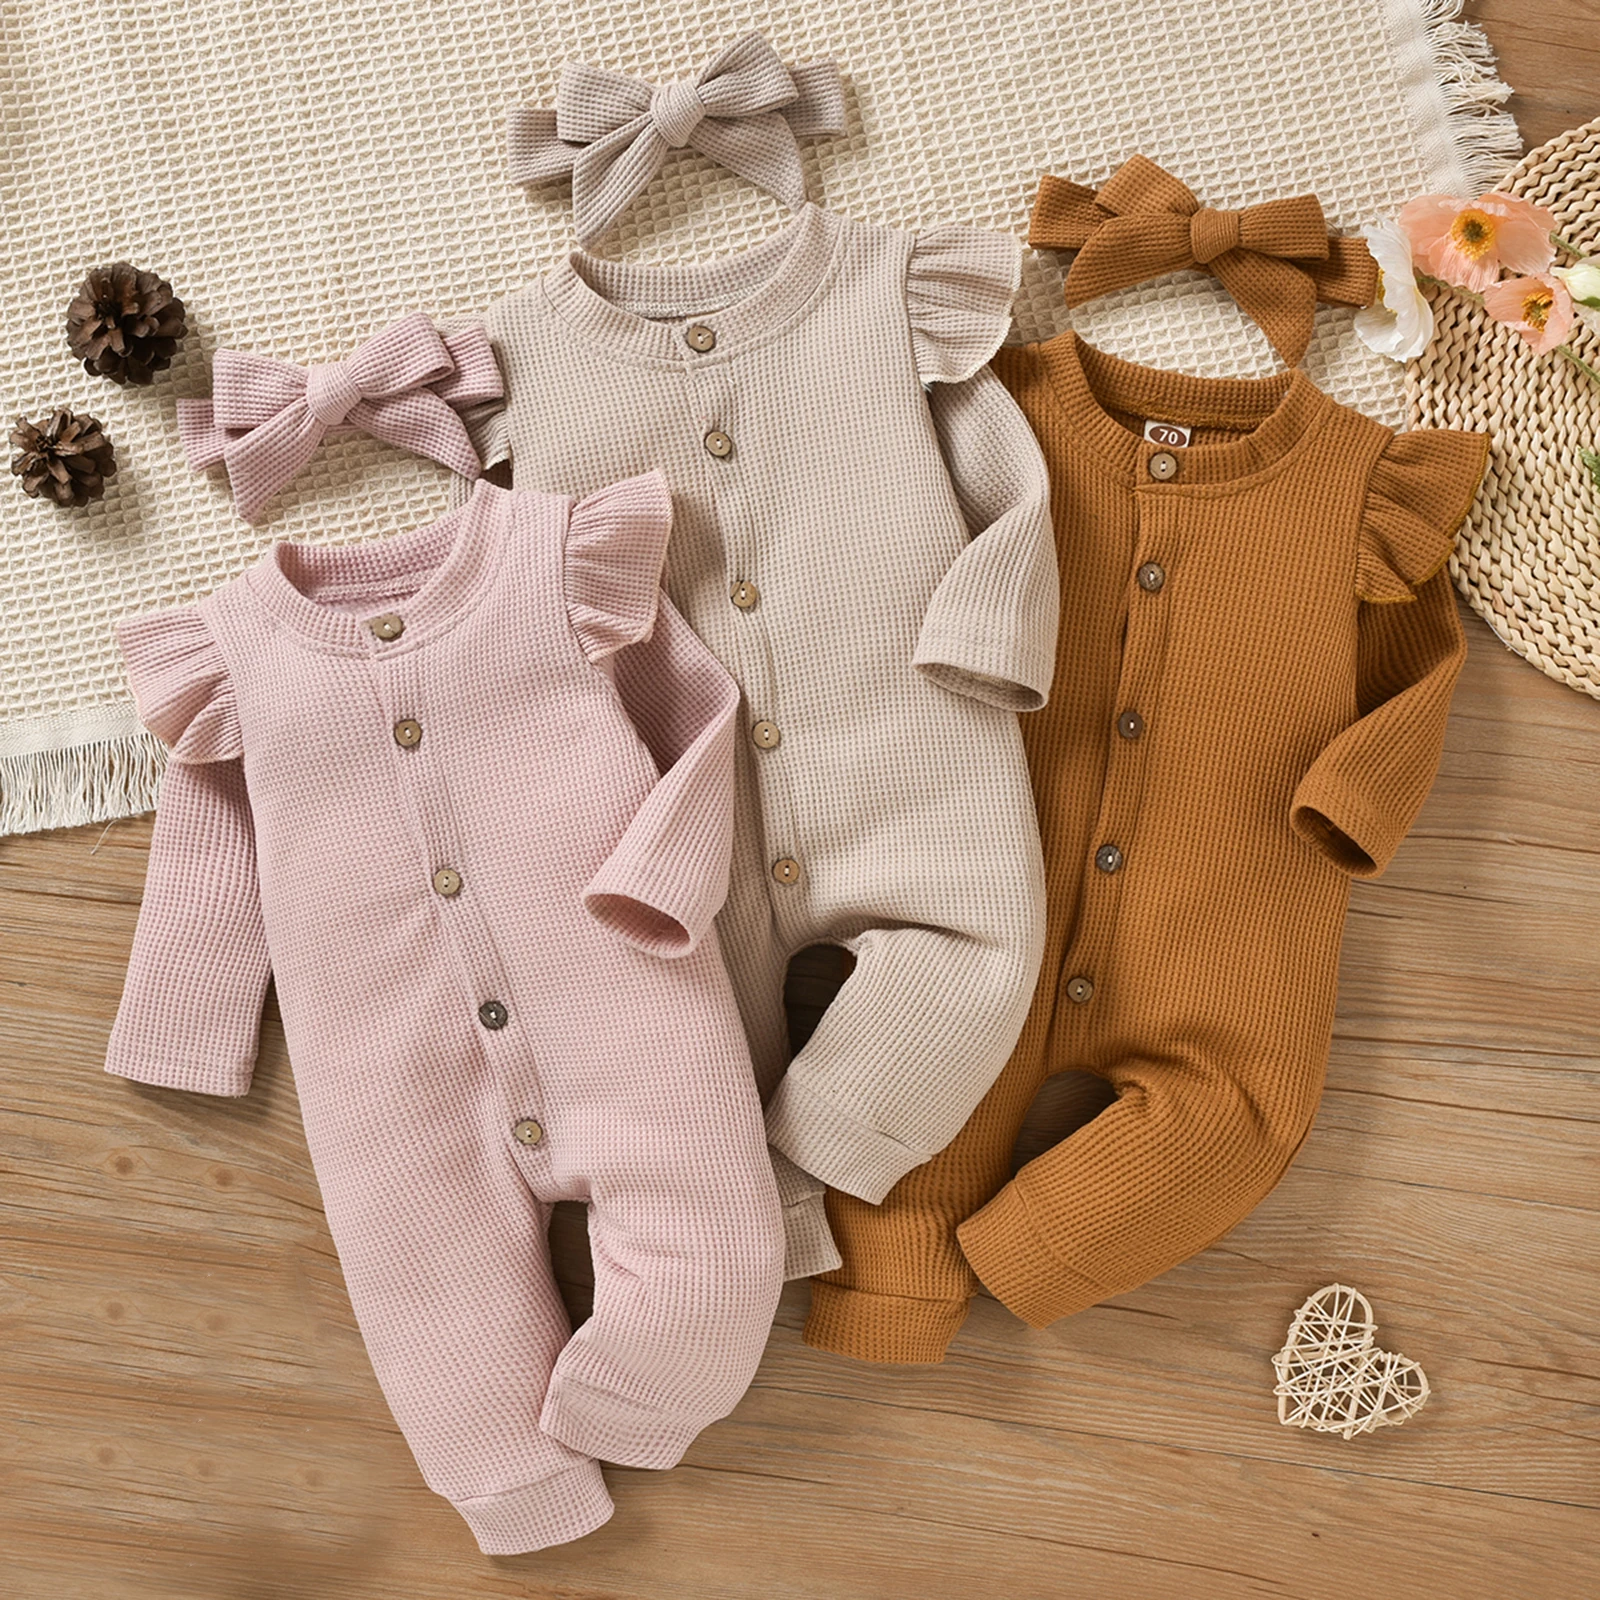 Cotton baby suit Infant Baby Girls Jumpsuit with Headband, Long Sleeve Button Closure Jumpsuit with Bowknot Hairband bulk baby bodysuits	